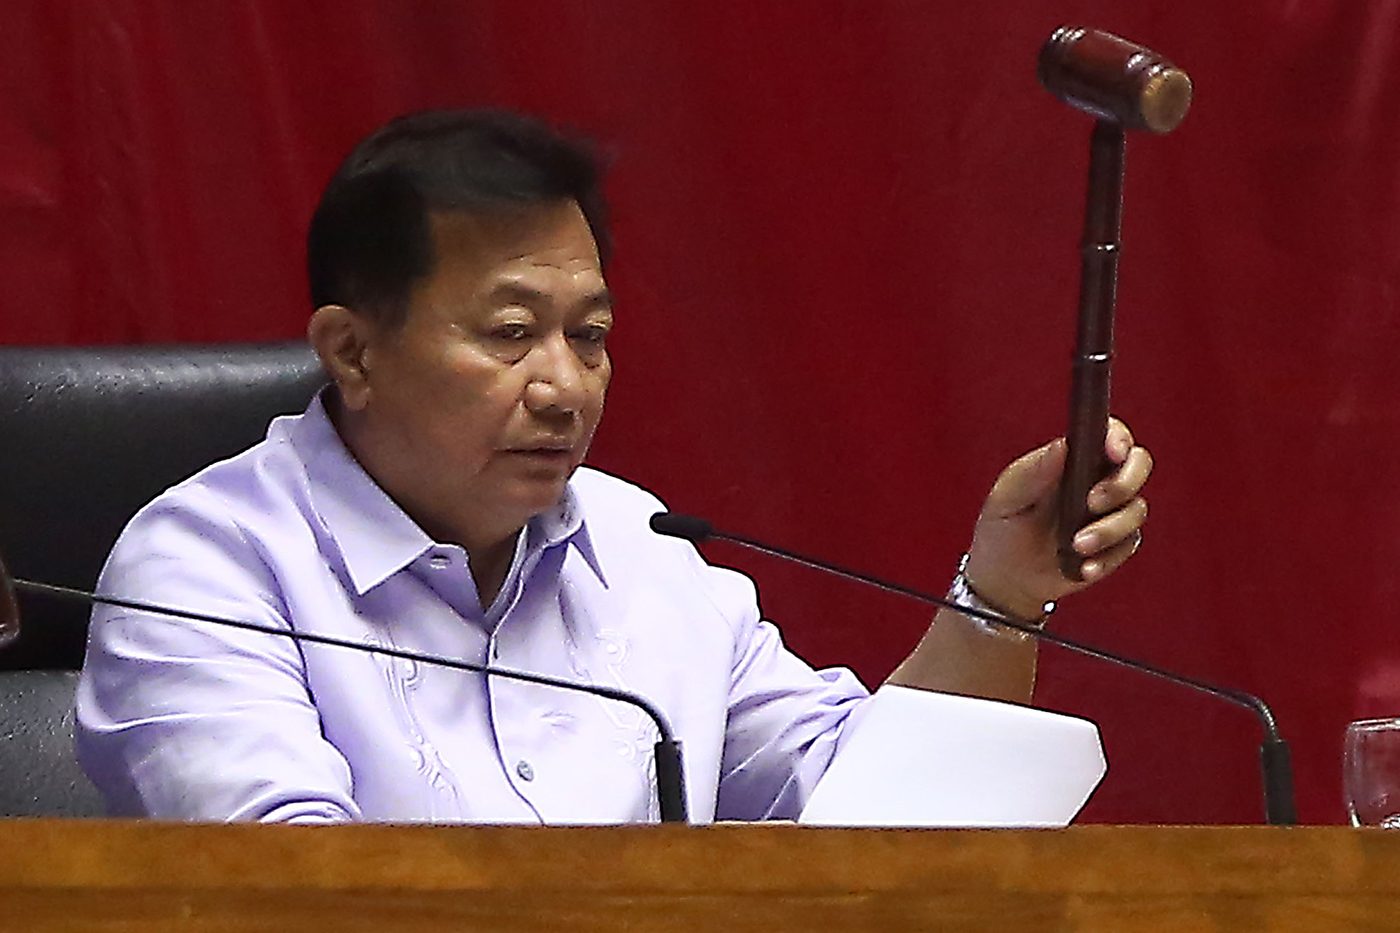 Marawi resident claiming martial law abuses ‘a voice in the wilderness’ – Alvarez